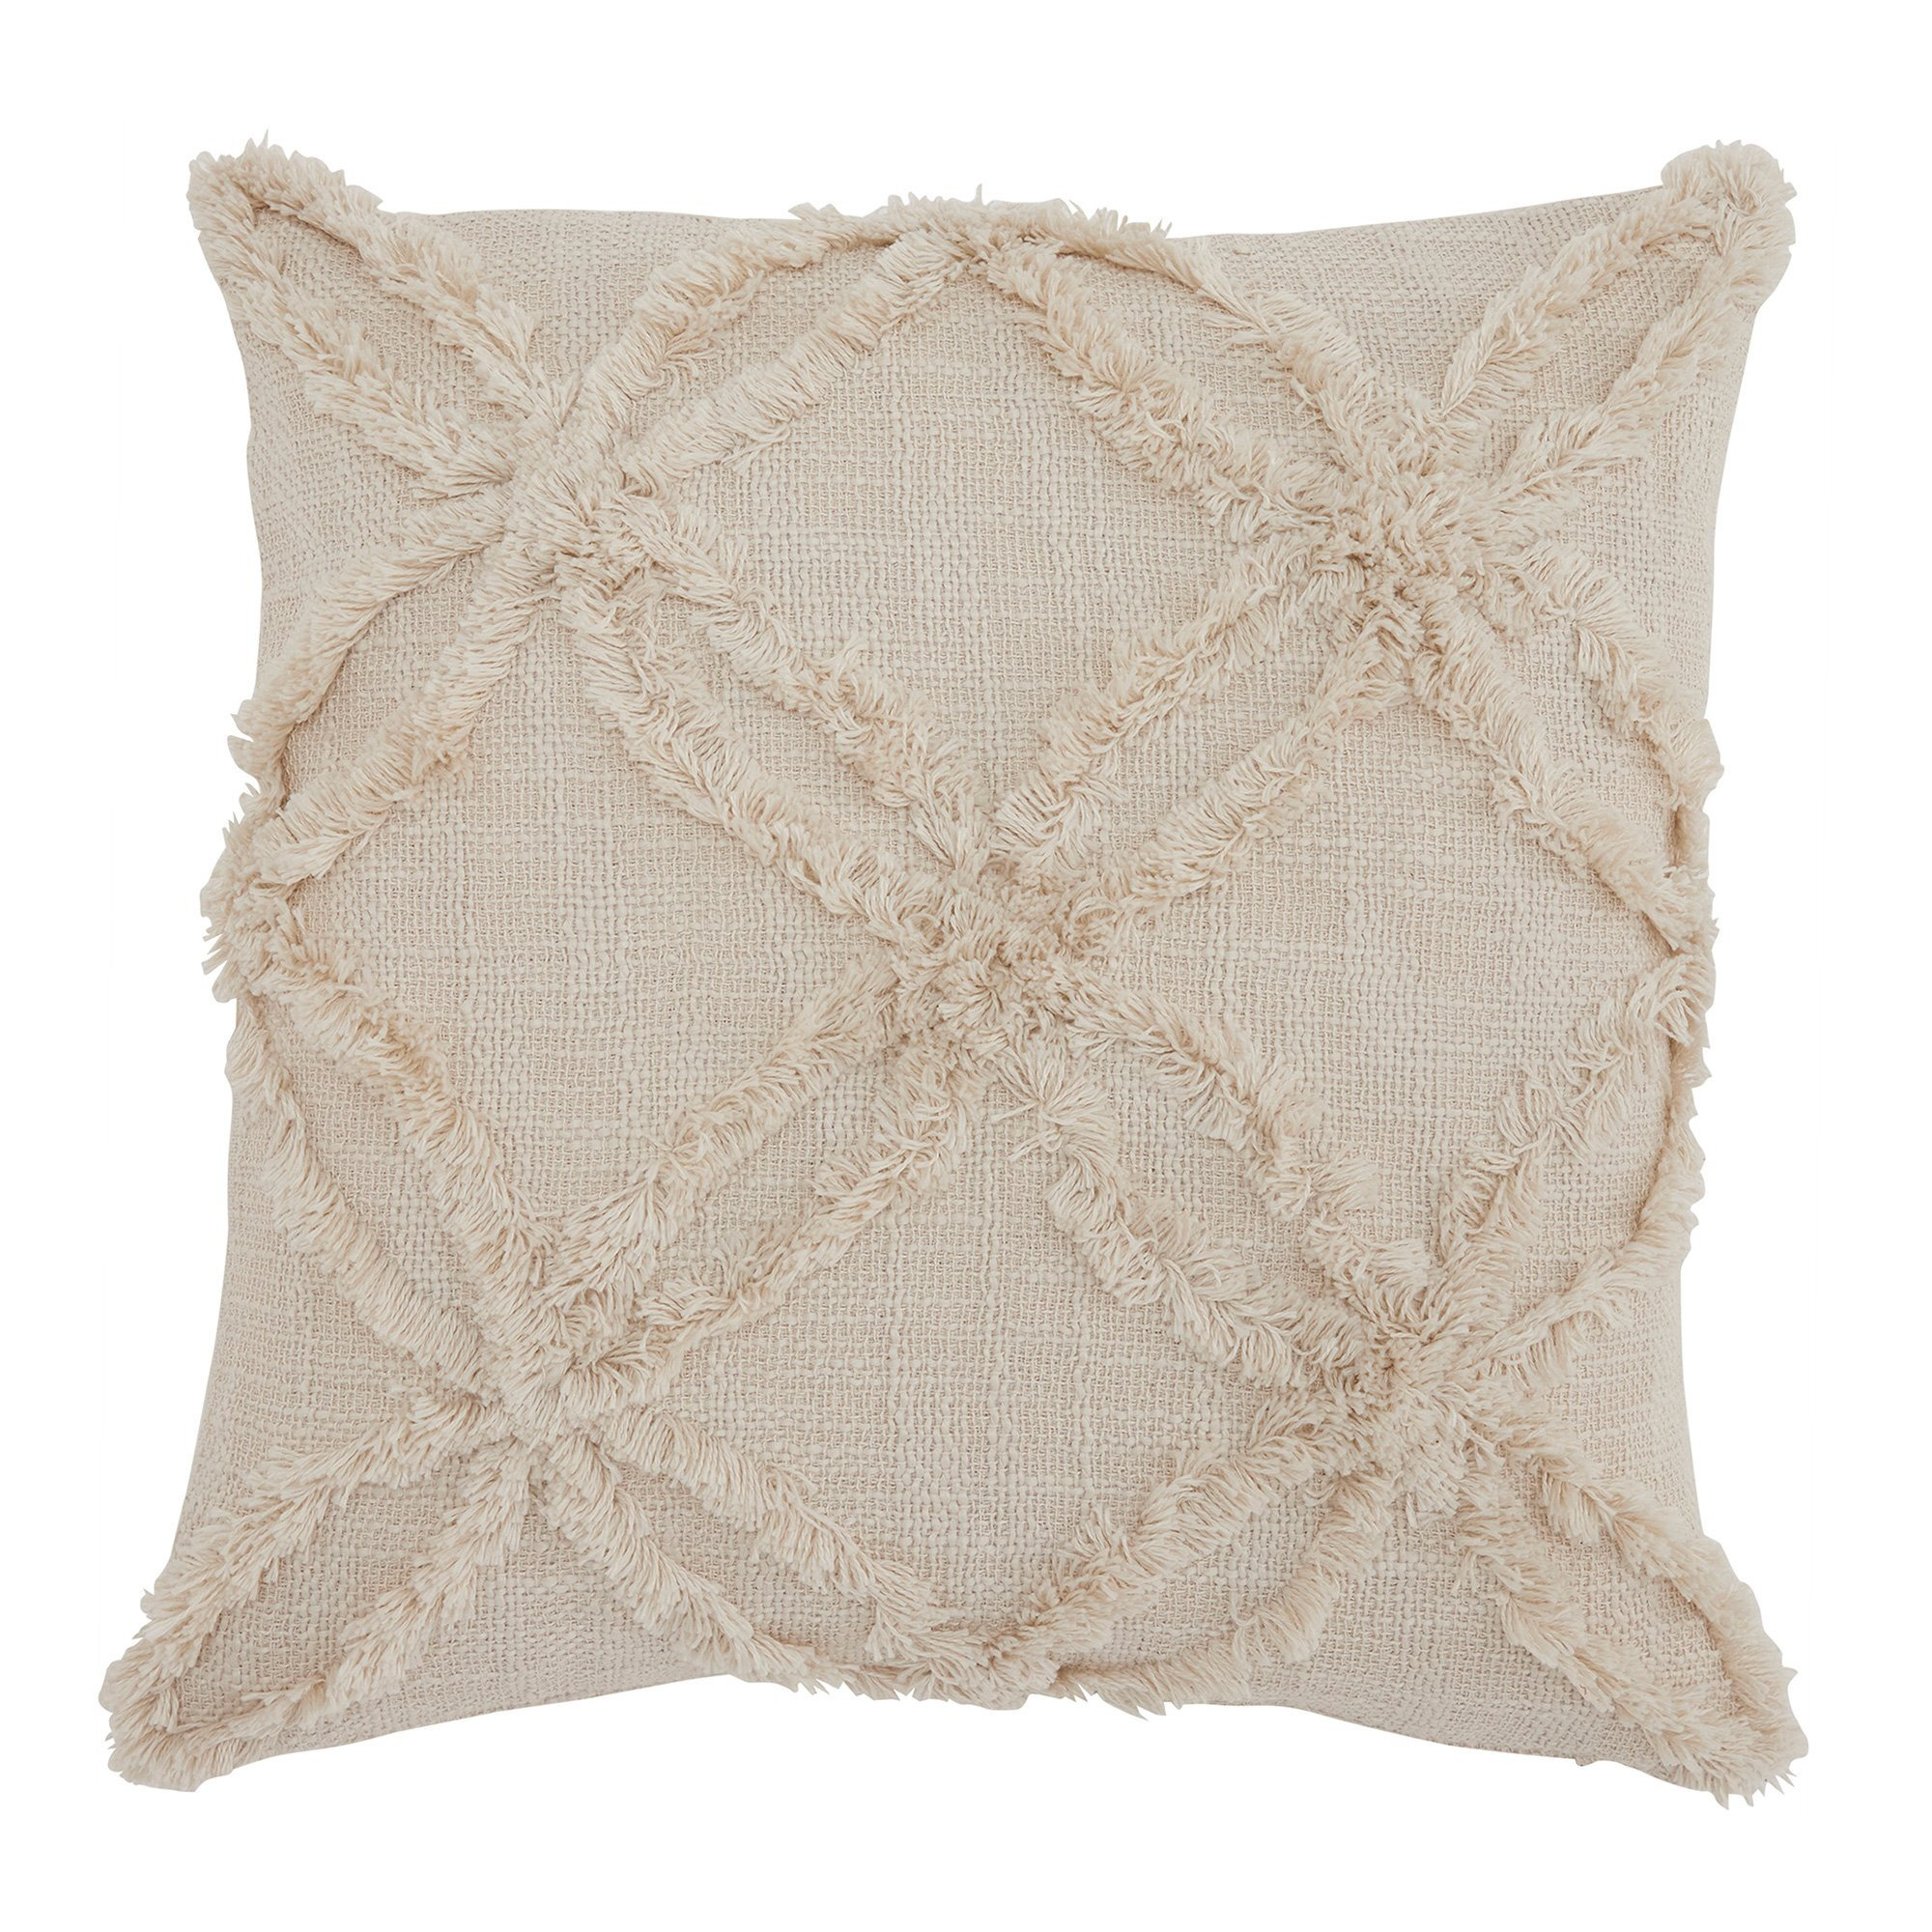 Flora Cream Recycled Plastic Cushion, Square - Barker & Stonehouse - image 1